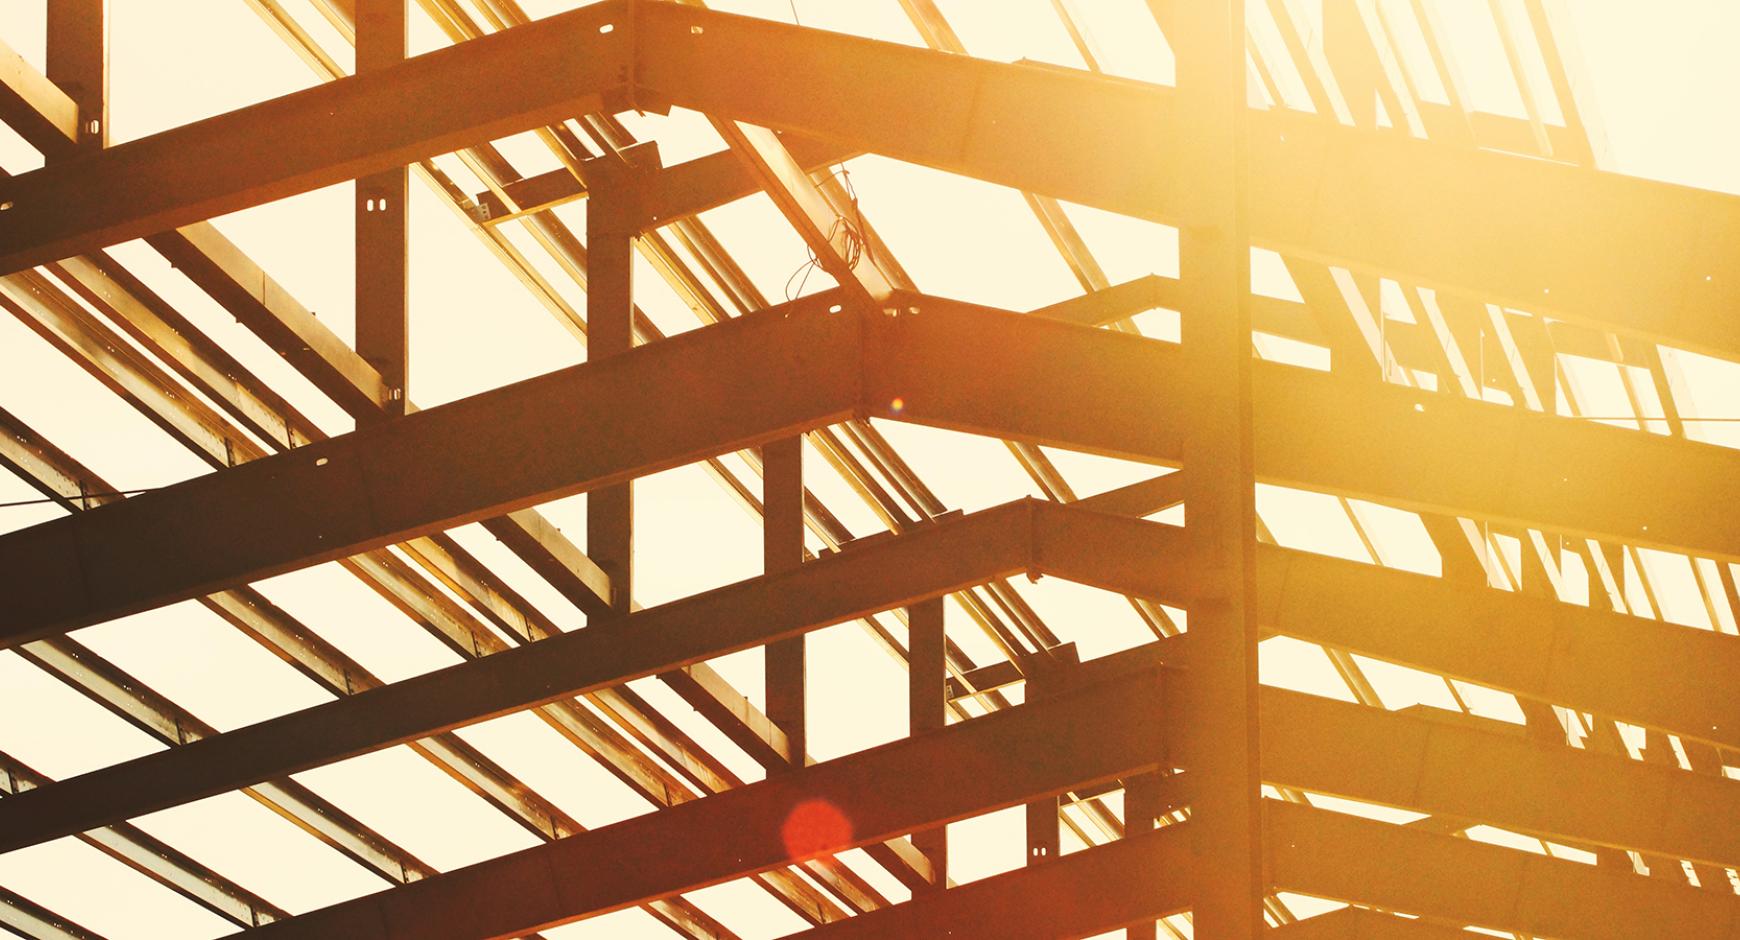 Photo of a roofing framework.